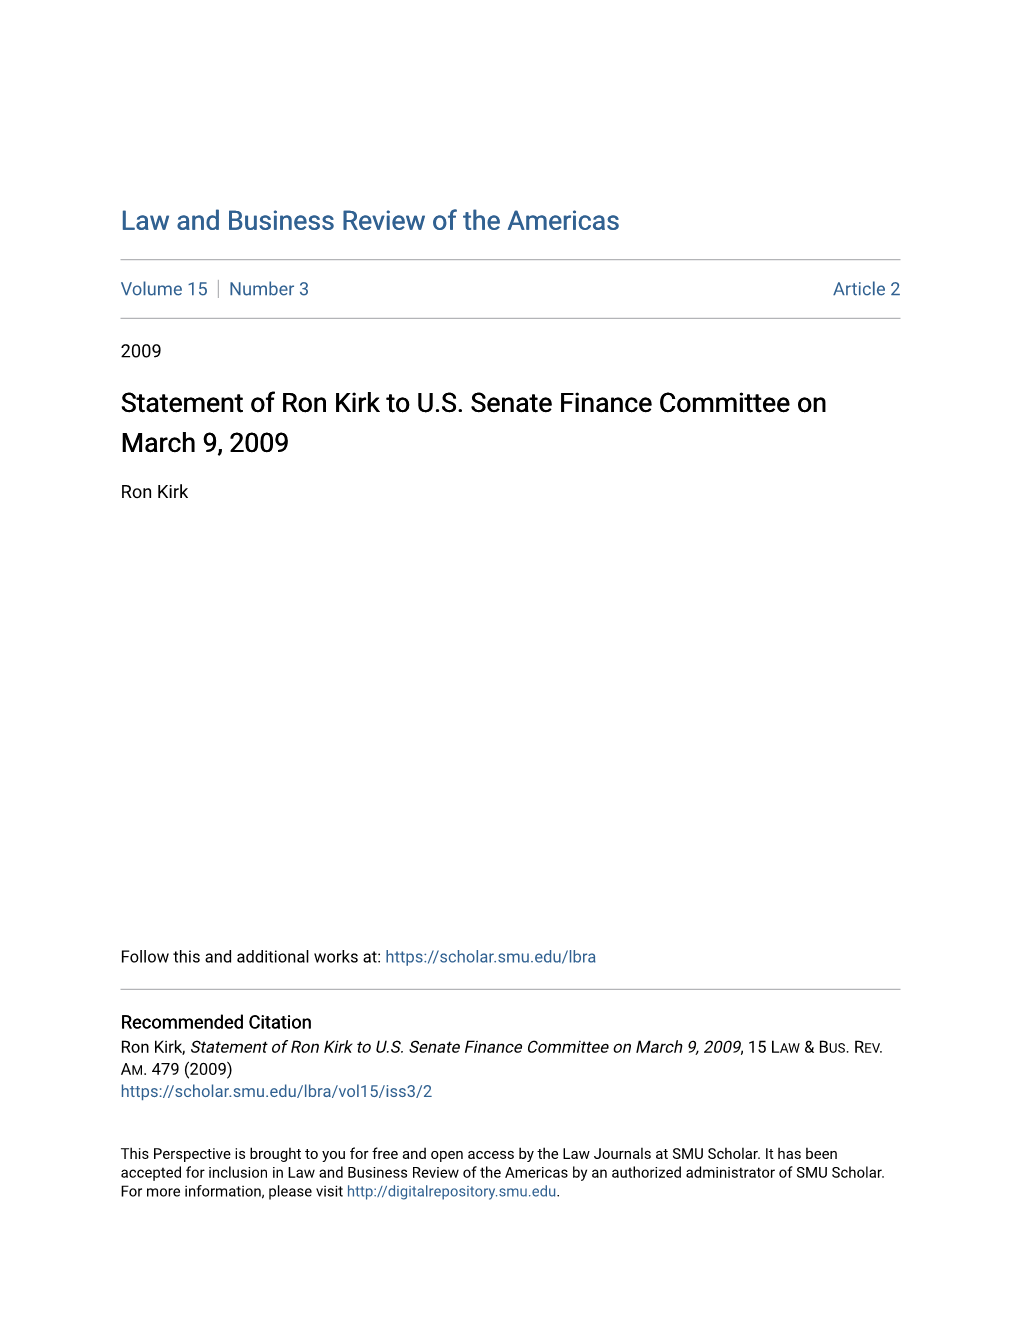 Statement of Ron Kirk to U.S. Senate Finance Committee on March 9, 2009